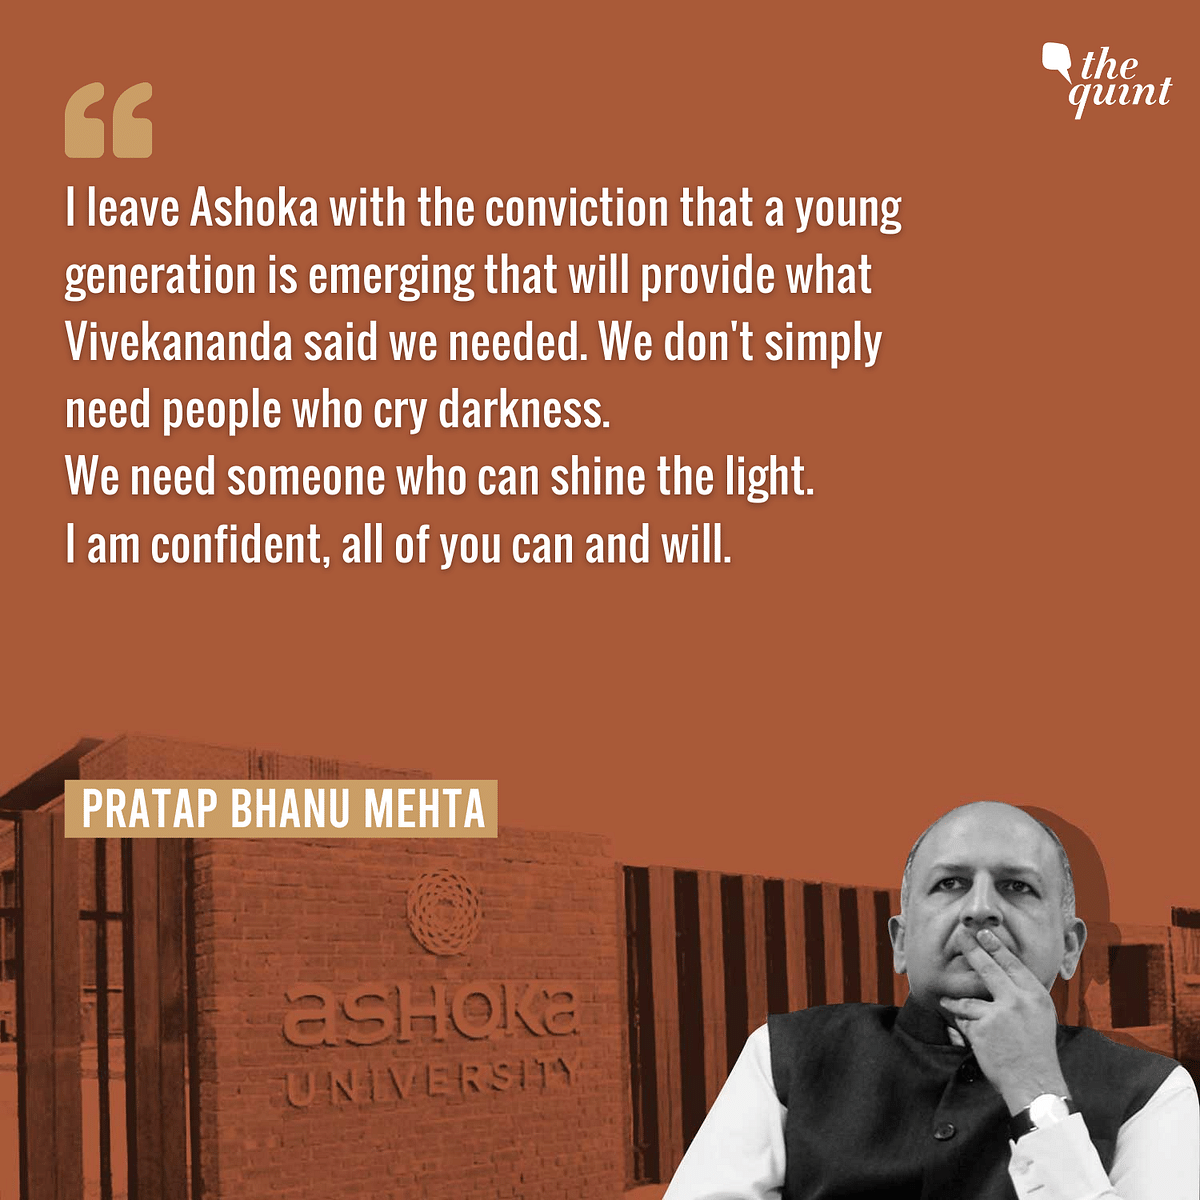 After his sudden departure, PB Mehta penned an emotional letter to his students. Watch them read out his words.